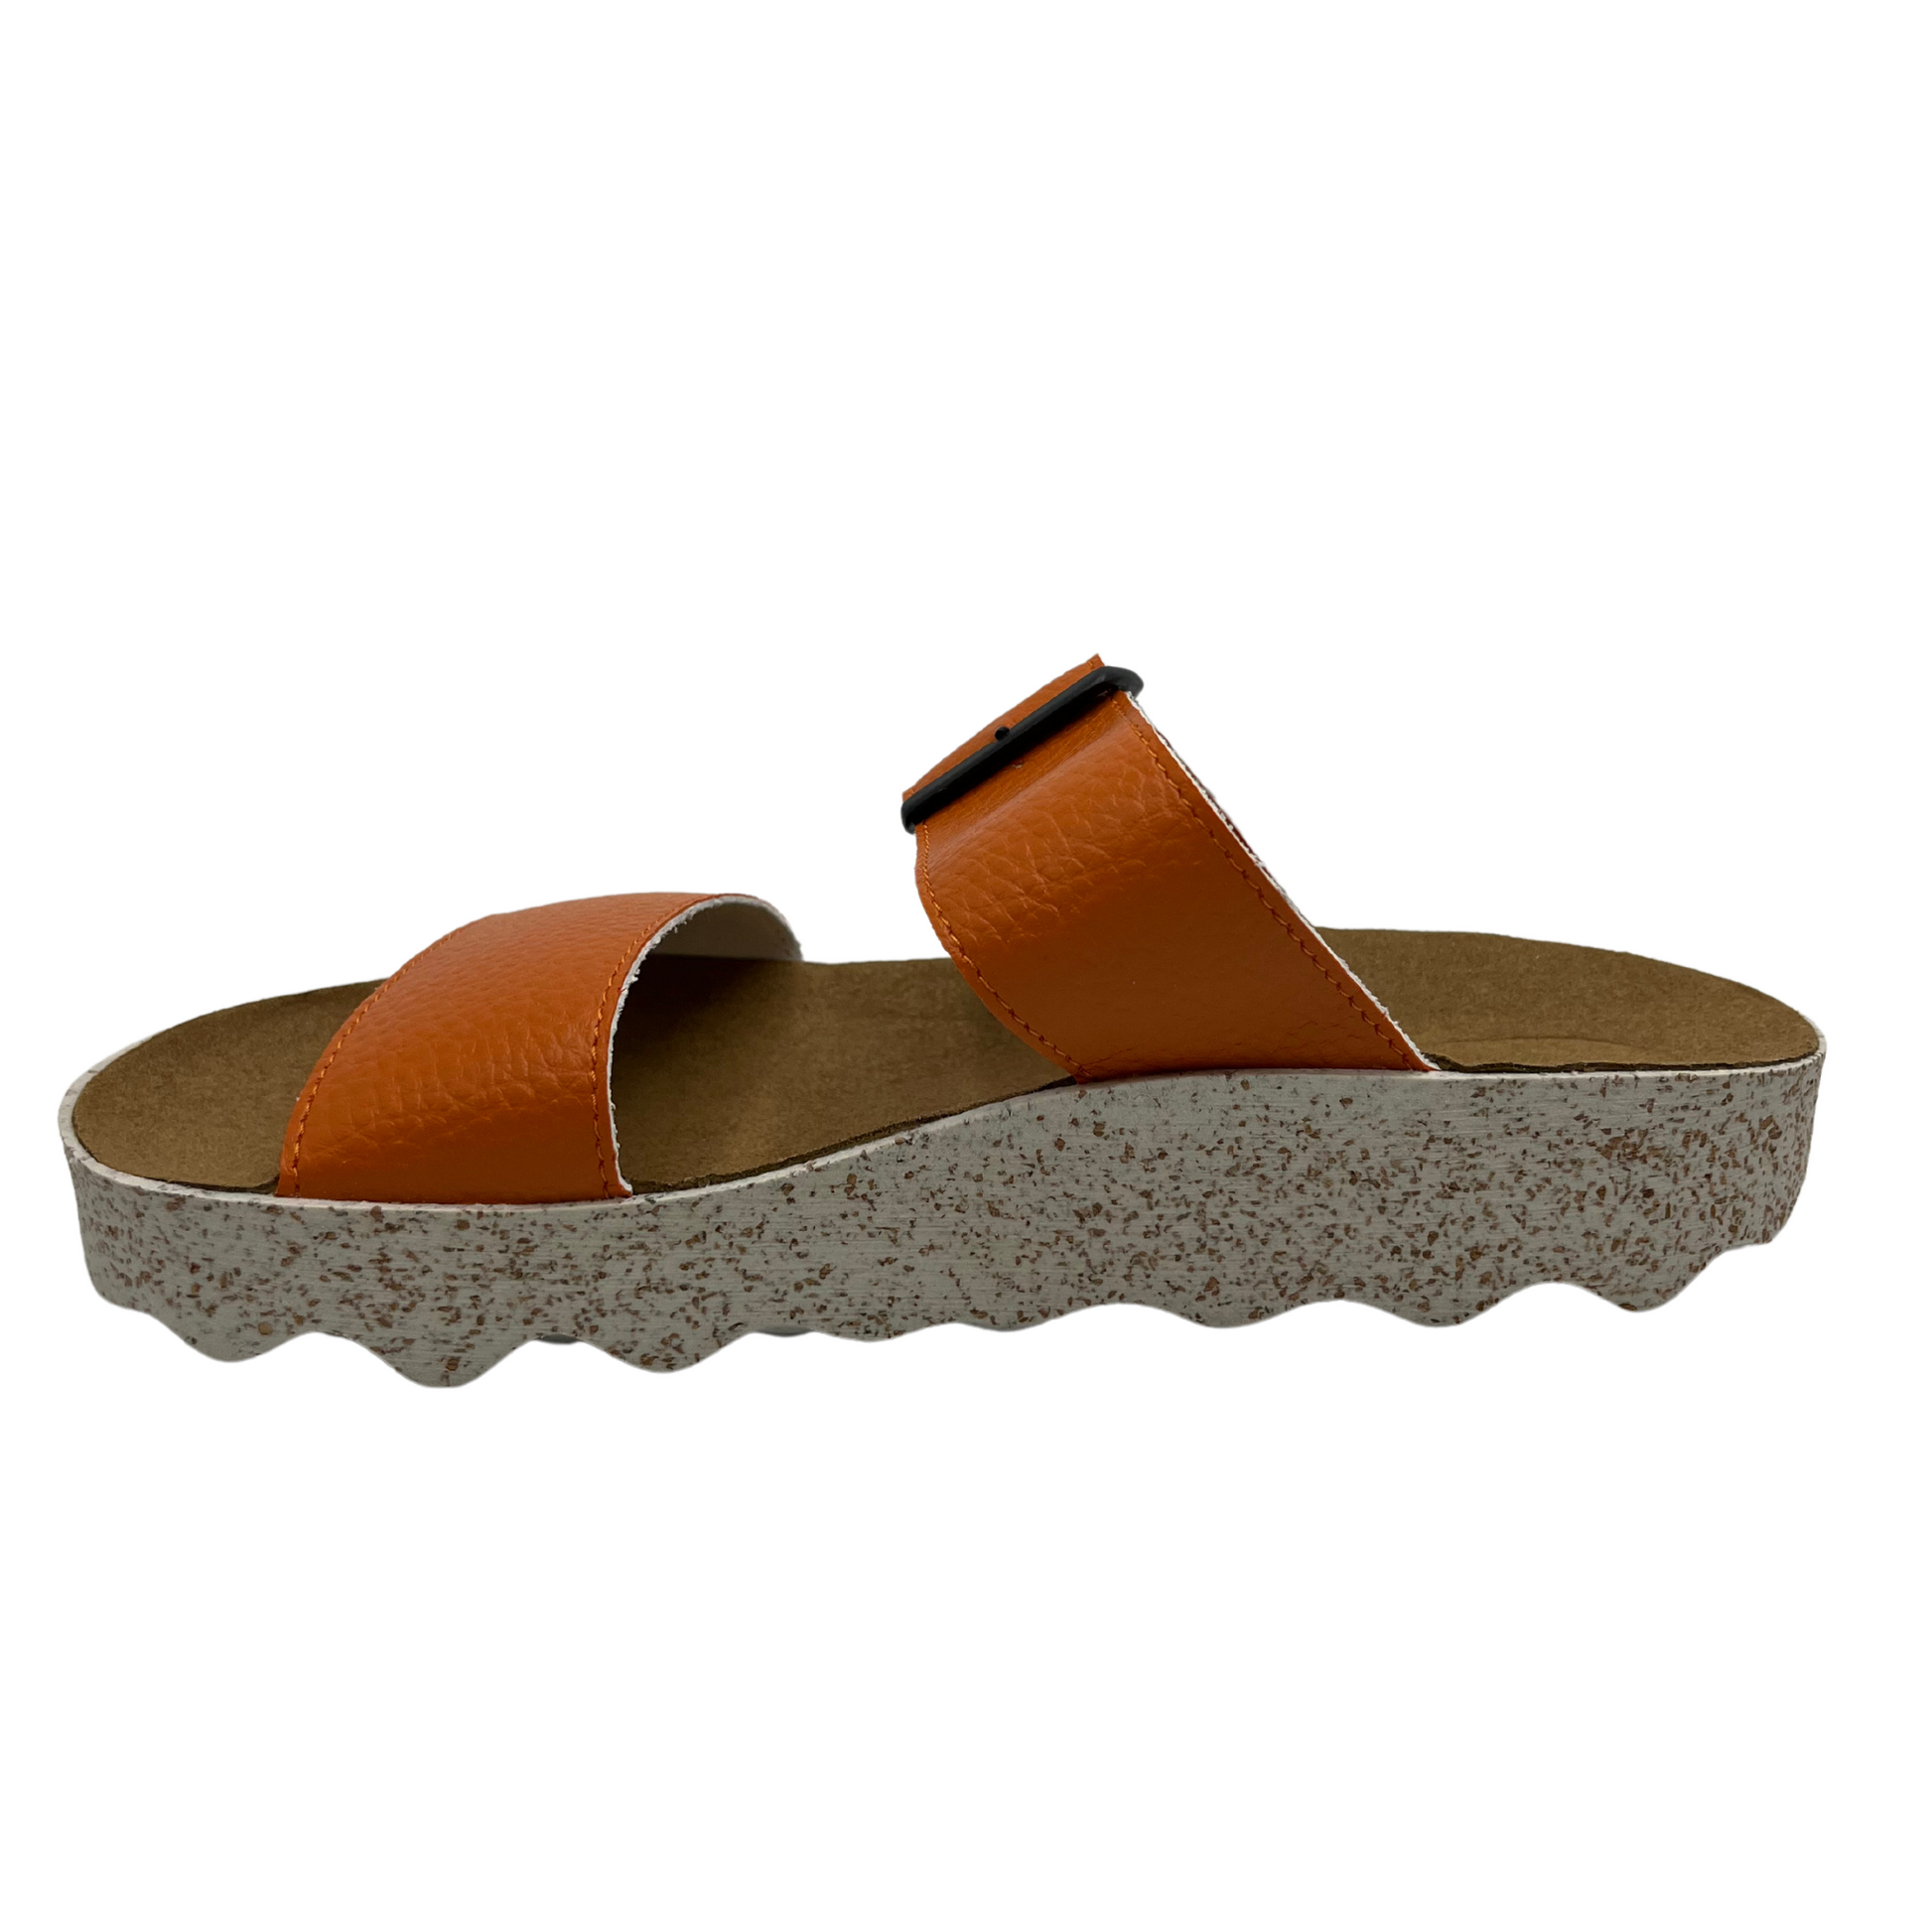 Left facing view of orange strapped sandal with contoured footbed and speckled white and brown outsole